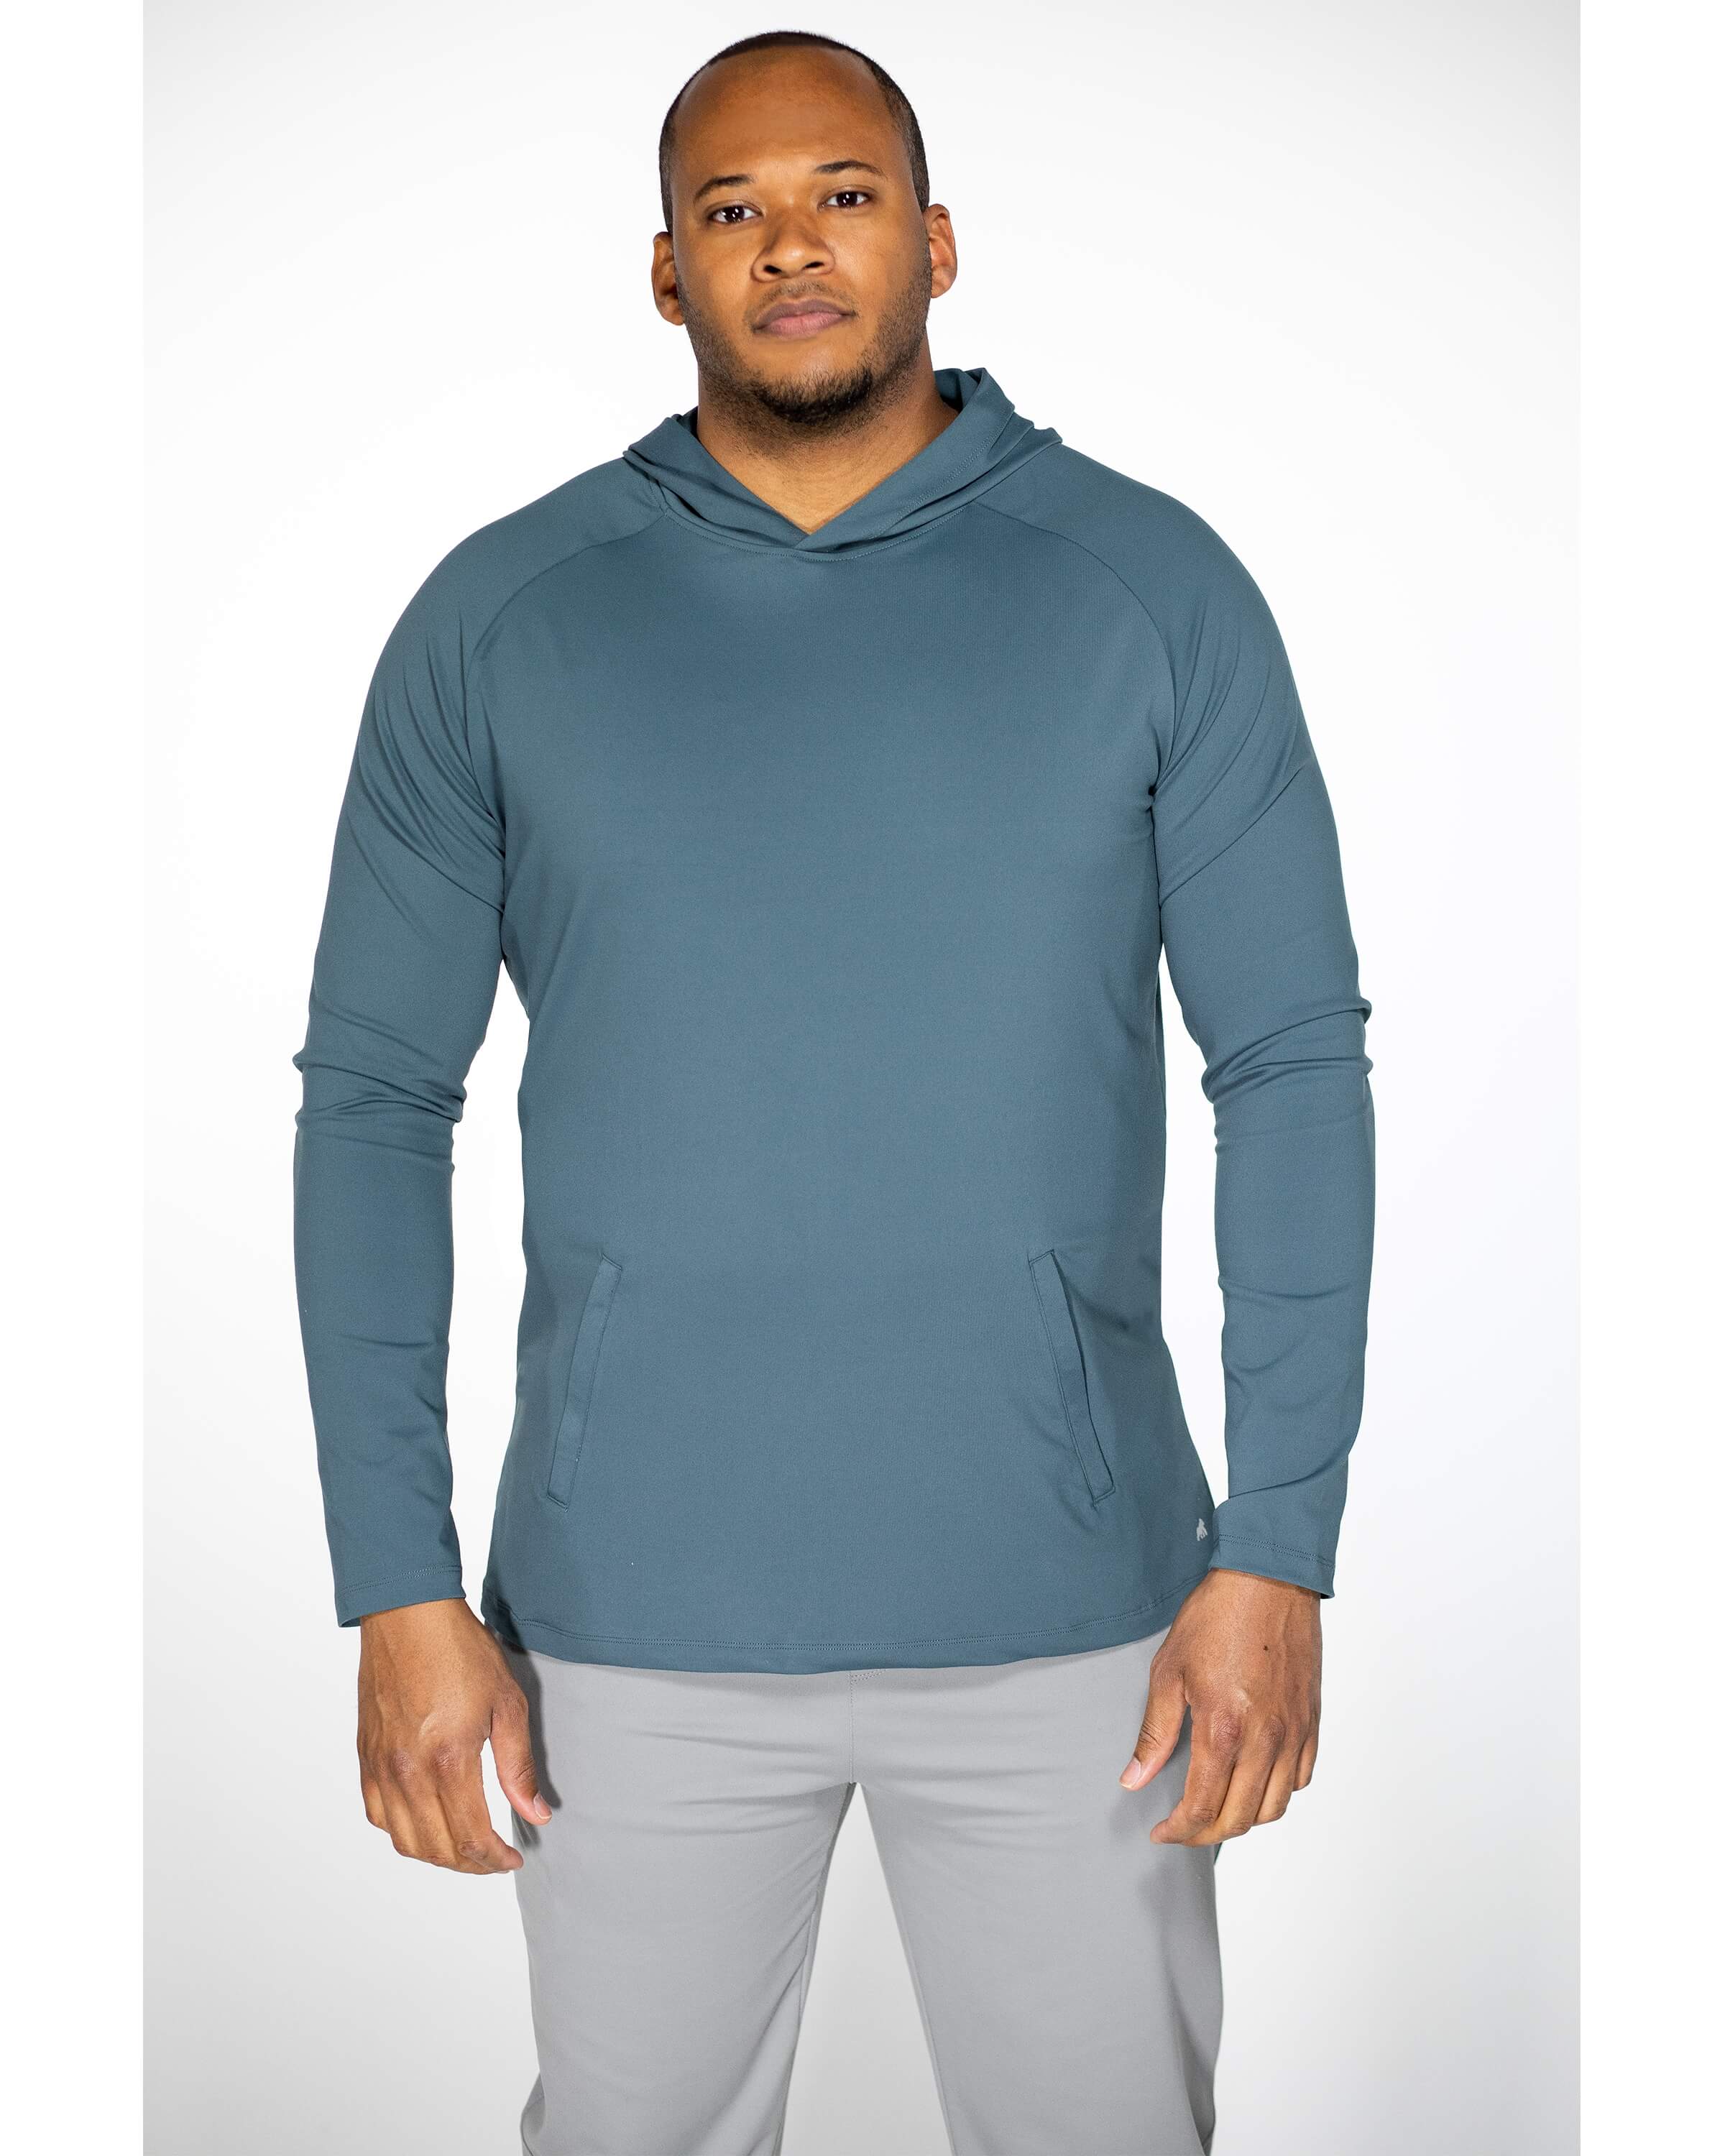 Men's Athleisure, From Joggers to Track Jackets - Forbes Vetted